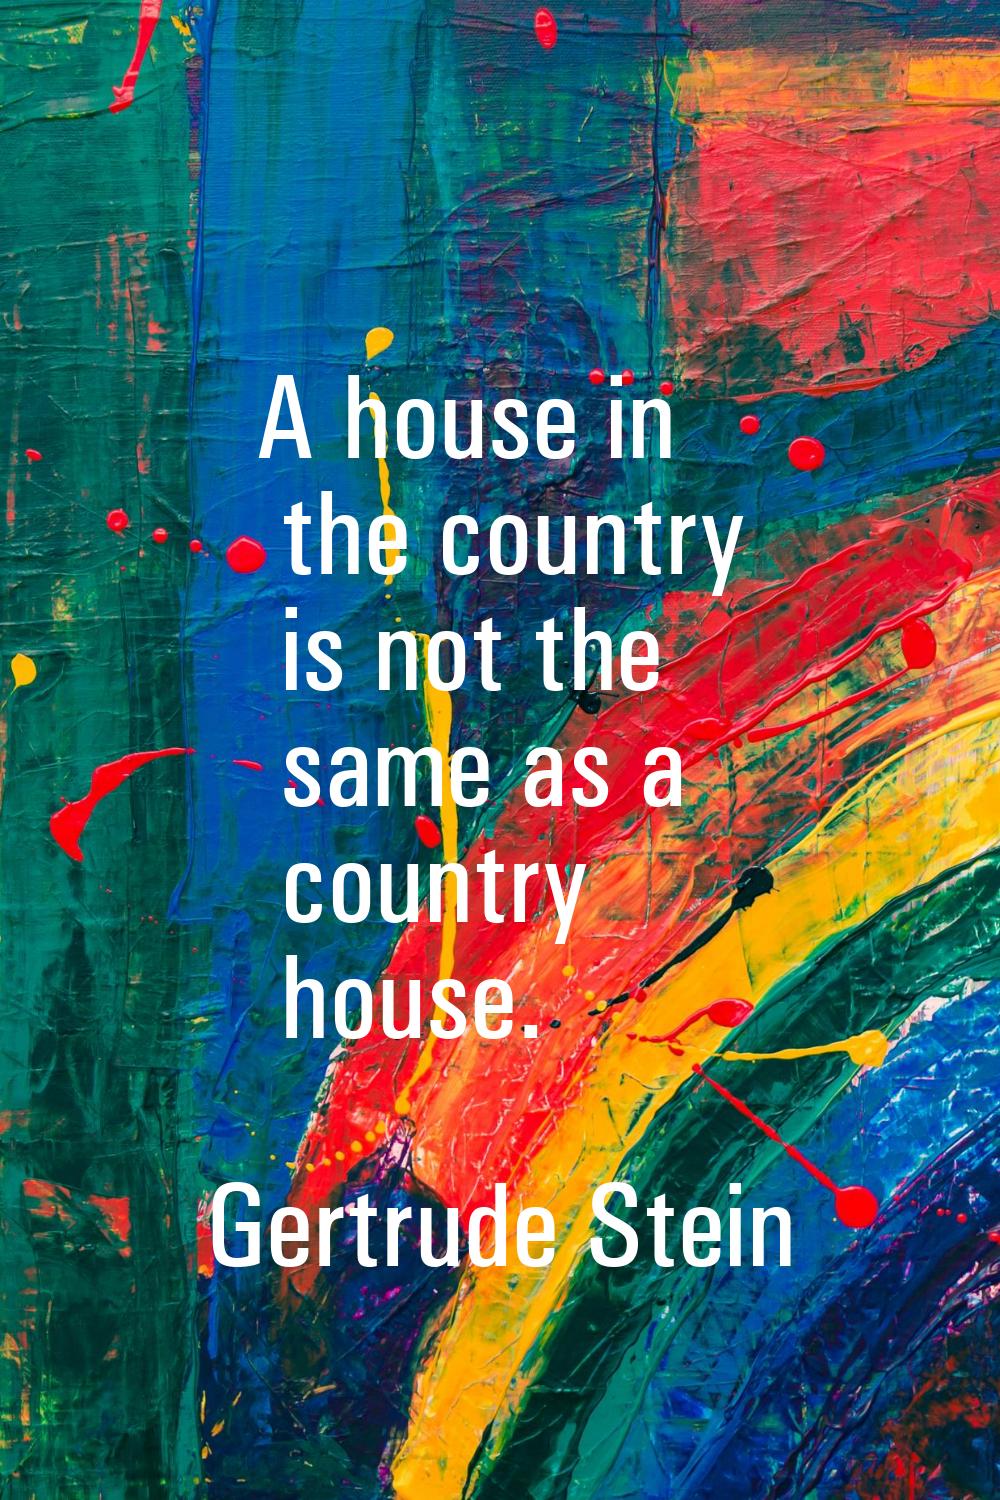 A house in the country is not the same as a country house.